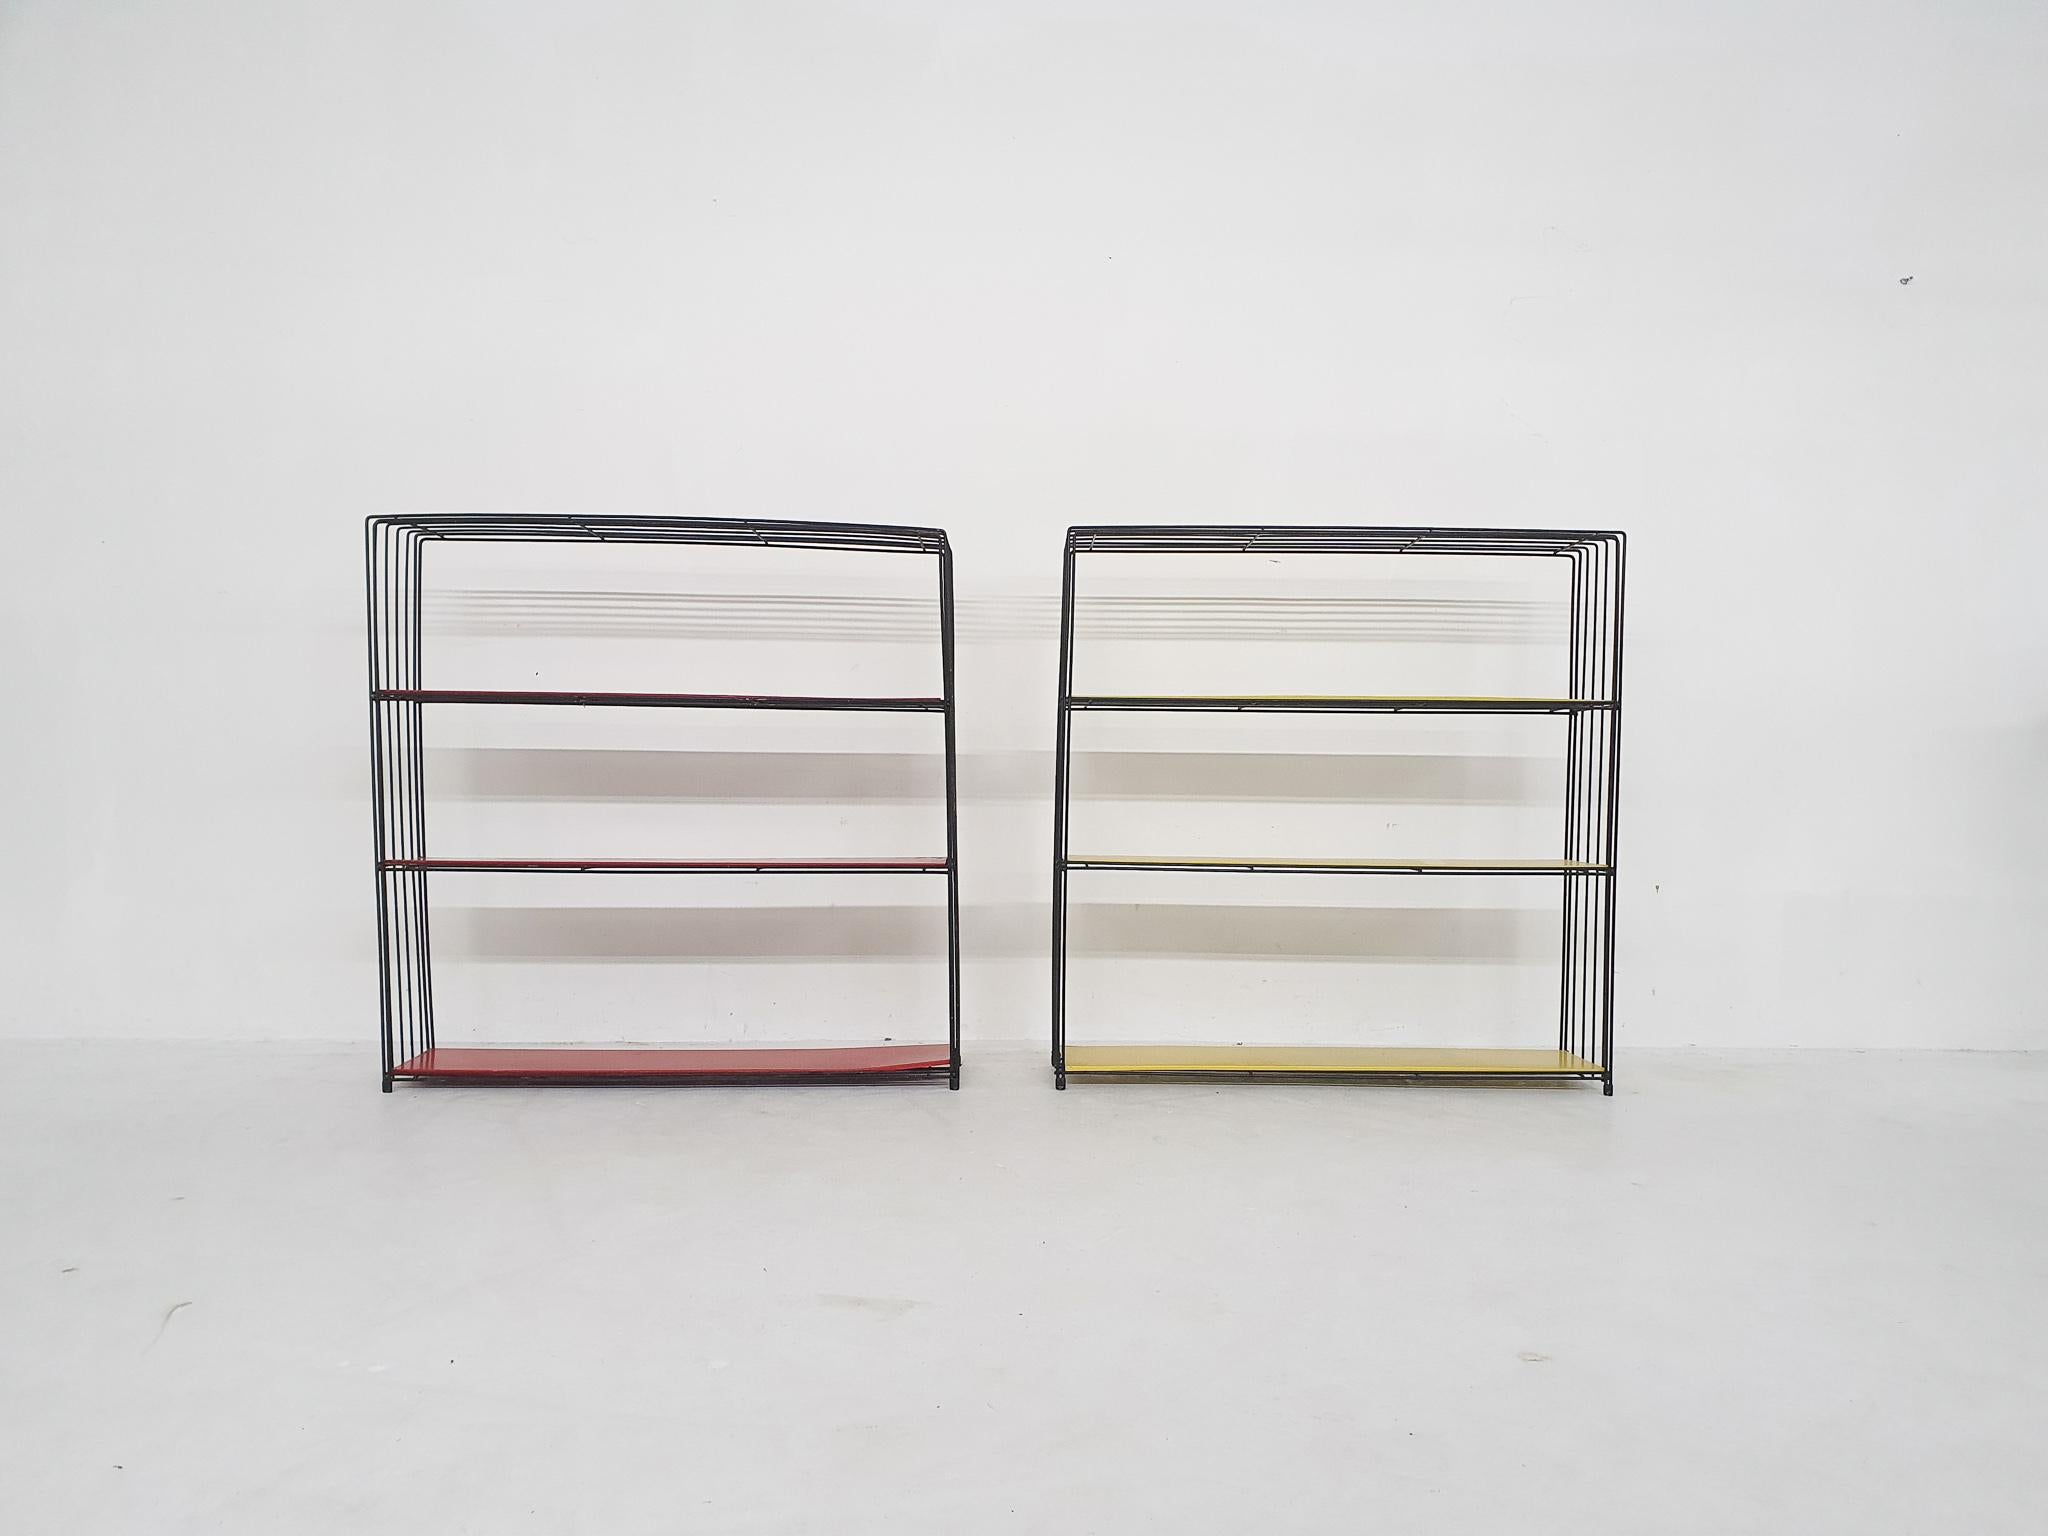 Set of 2 black metal room dividers or bookcase by Tjerk Reijenga for Pilastro, The Netherlands 1960's
Minimalistic black metal wired book case with 3 metal yellow shelves, and one with red shelves.
In good original condition.